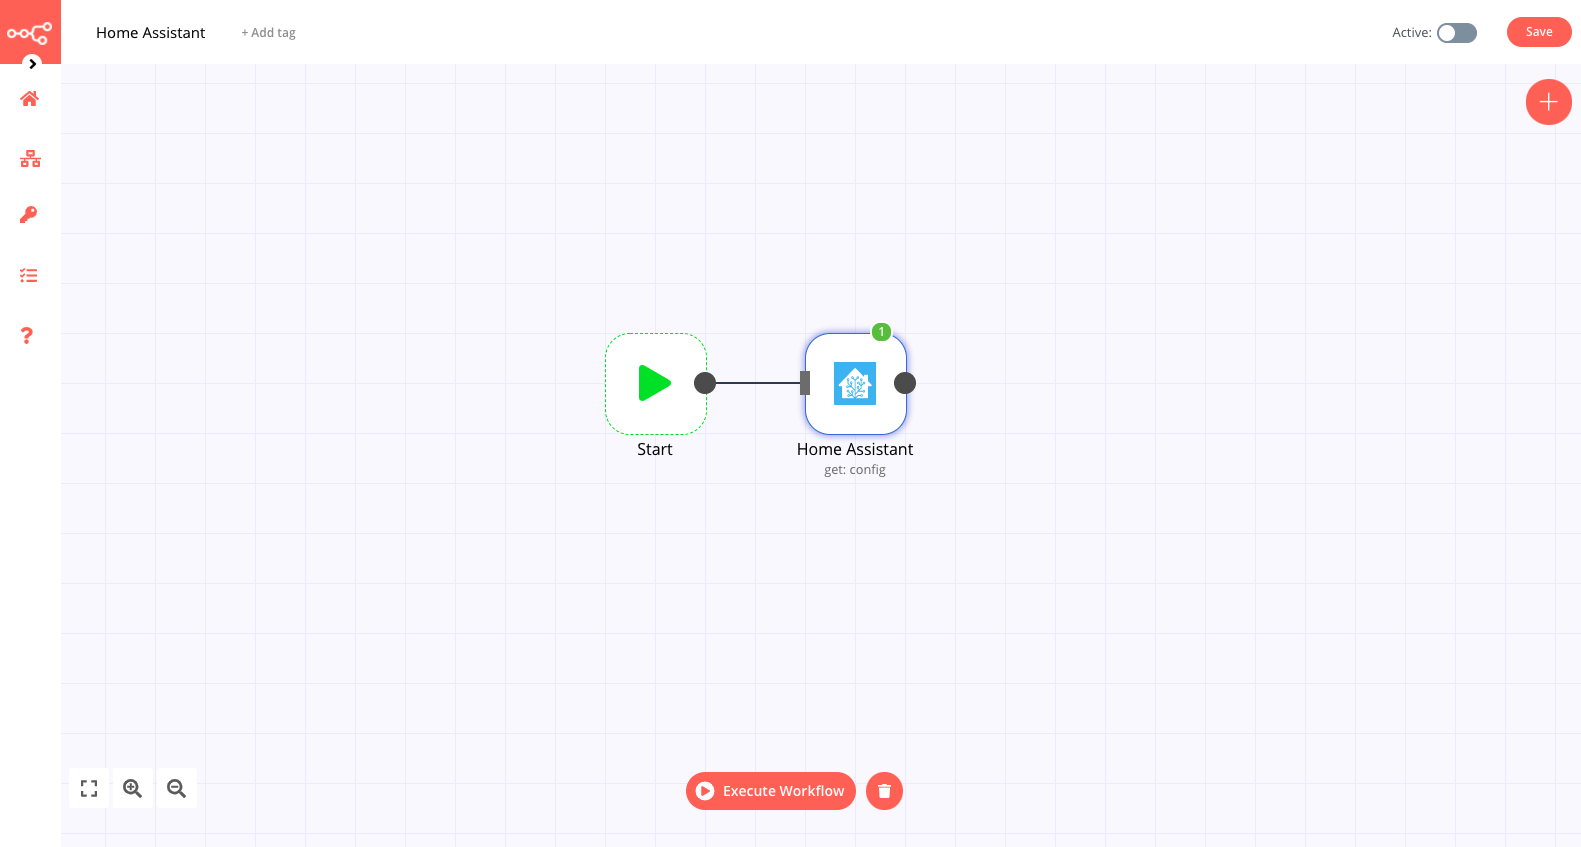 A workflow with the Home Assistant node